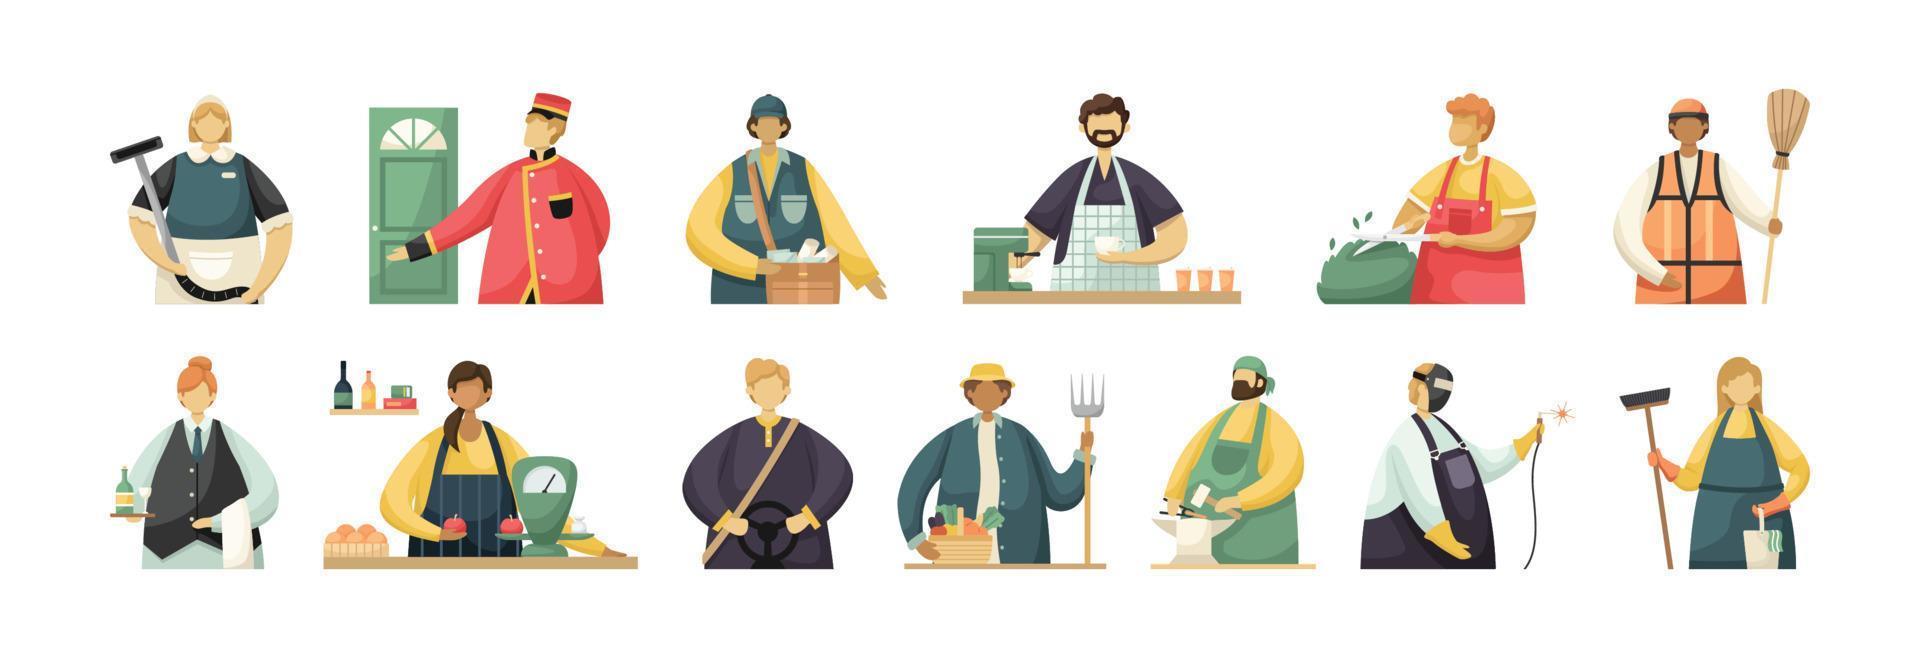 Vector set of illustrations of professional service workers and artisans. Flat style